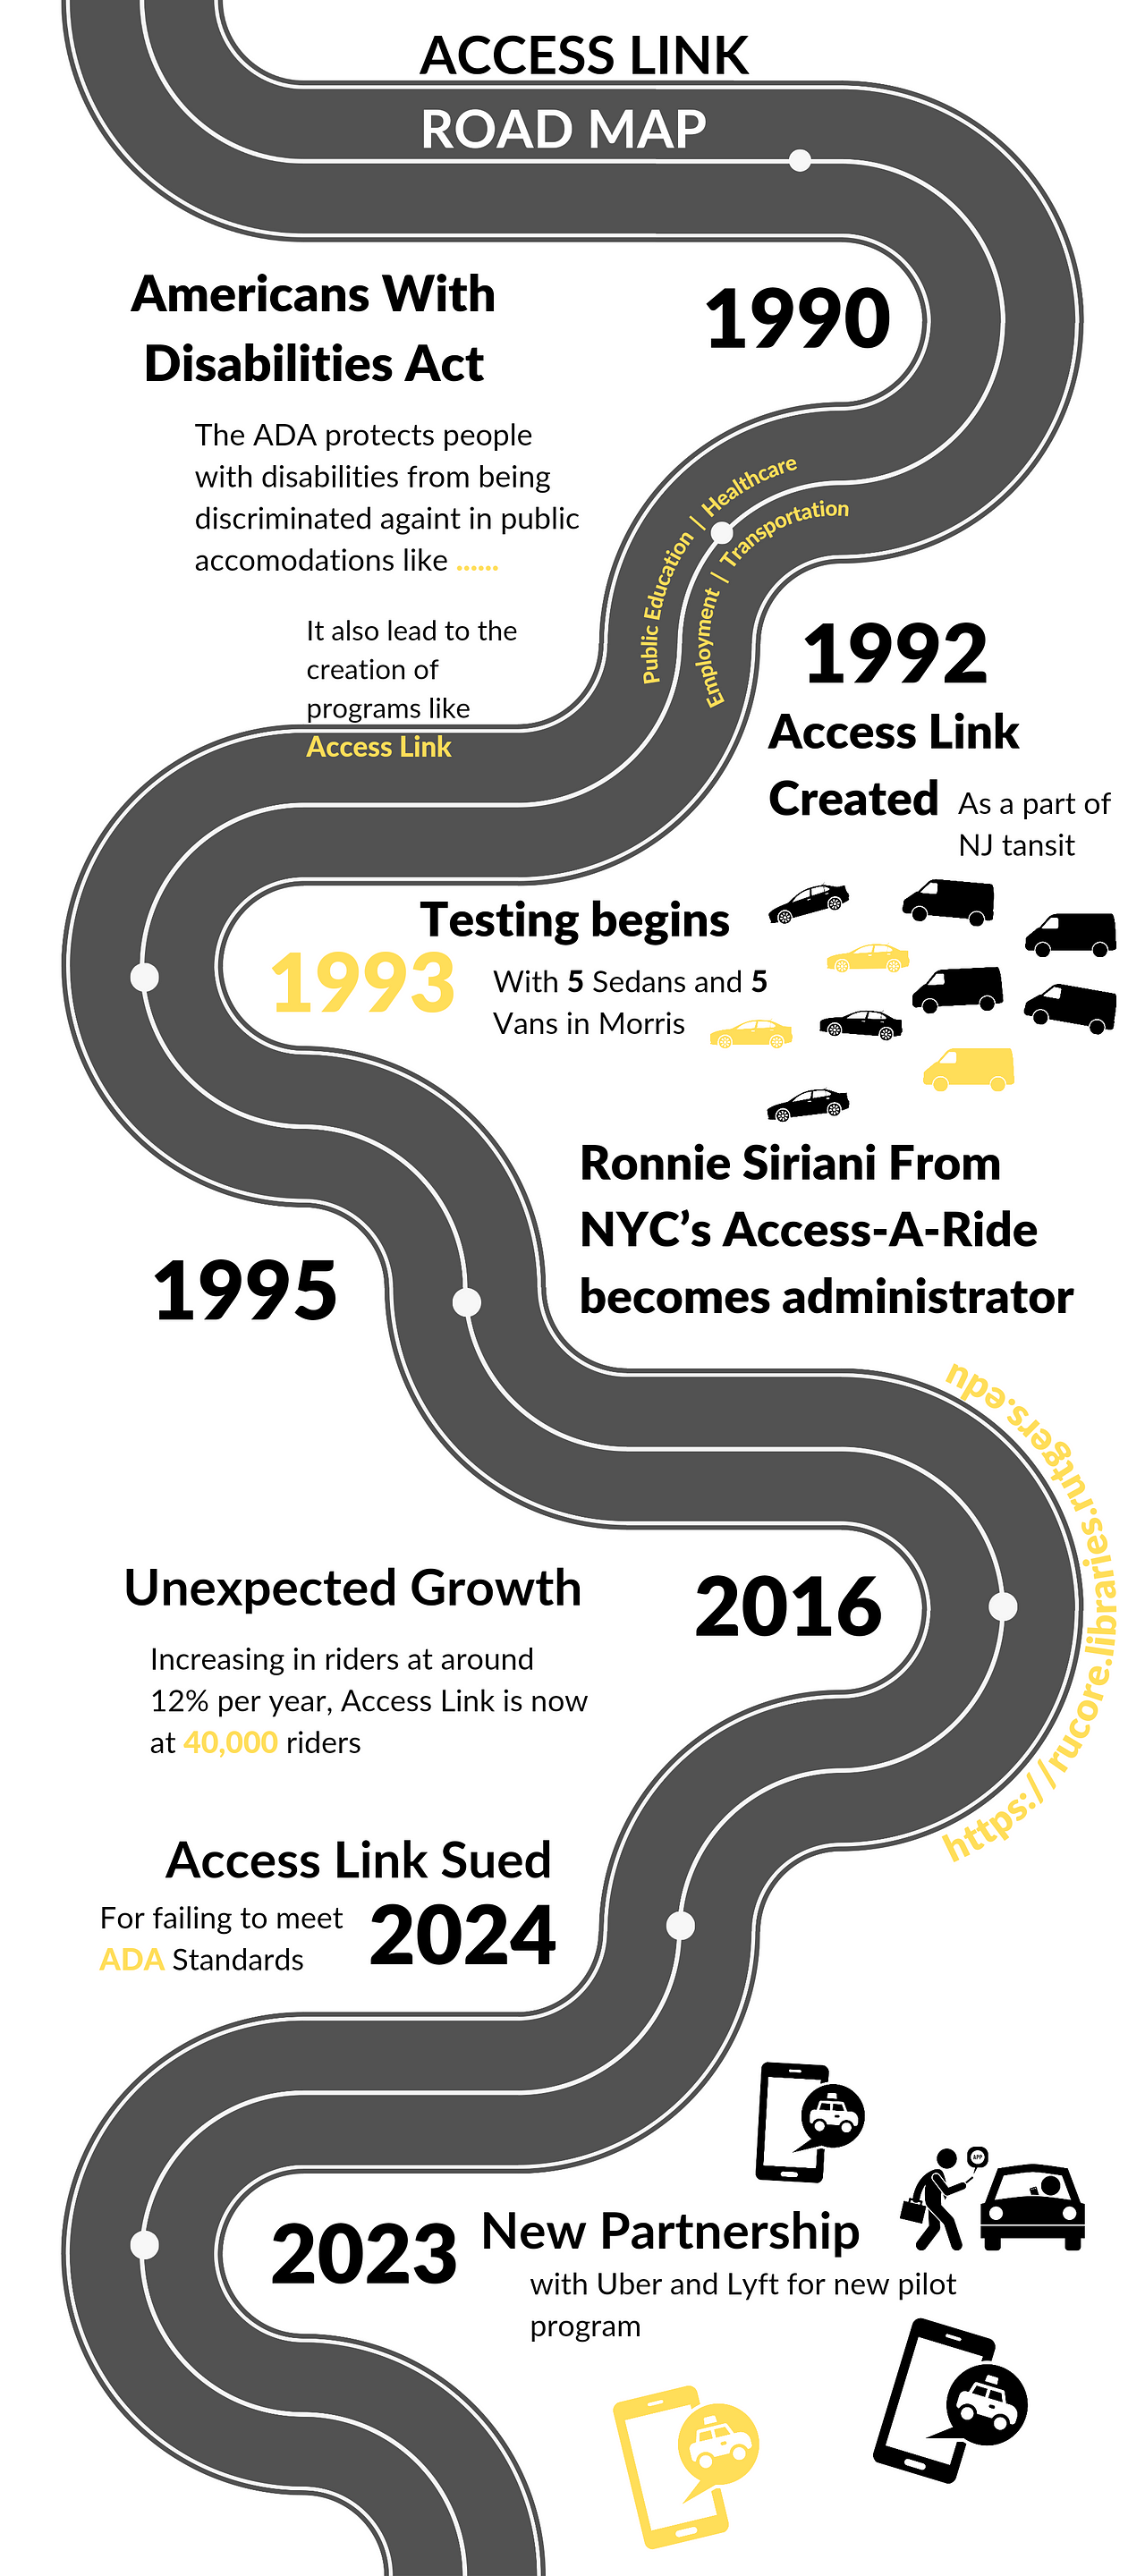 Access Link infographic showing the changes in the company over time.